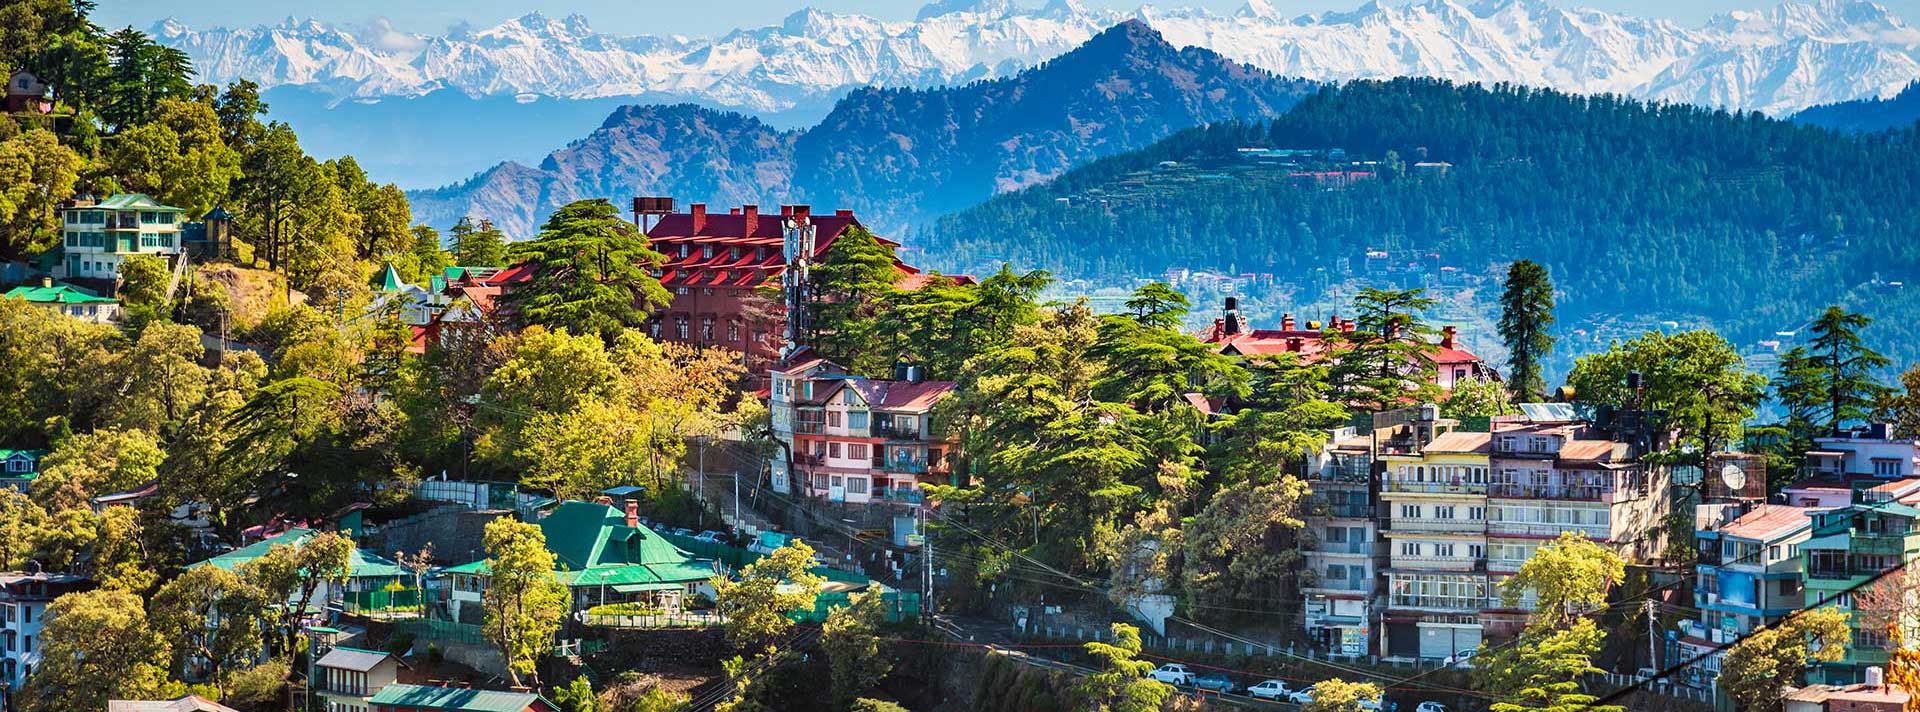 shimla tour package 2 nights 3 days from delhi